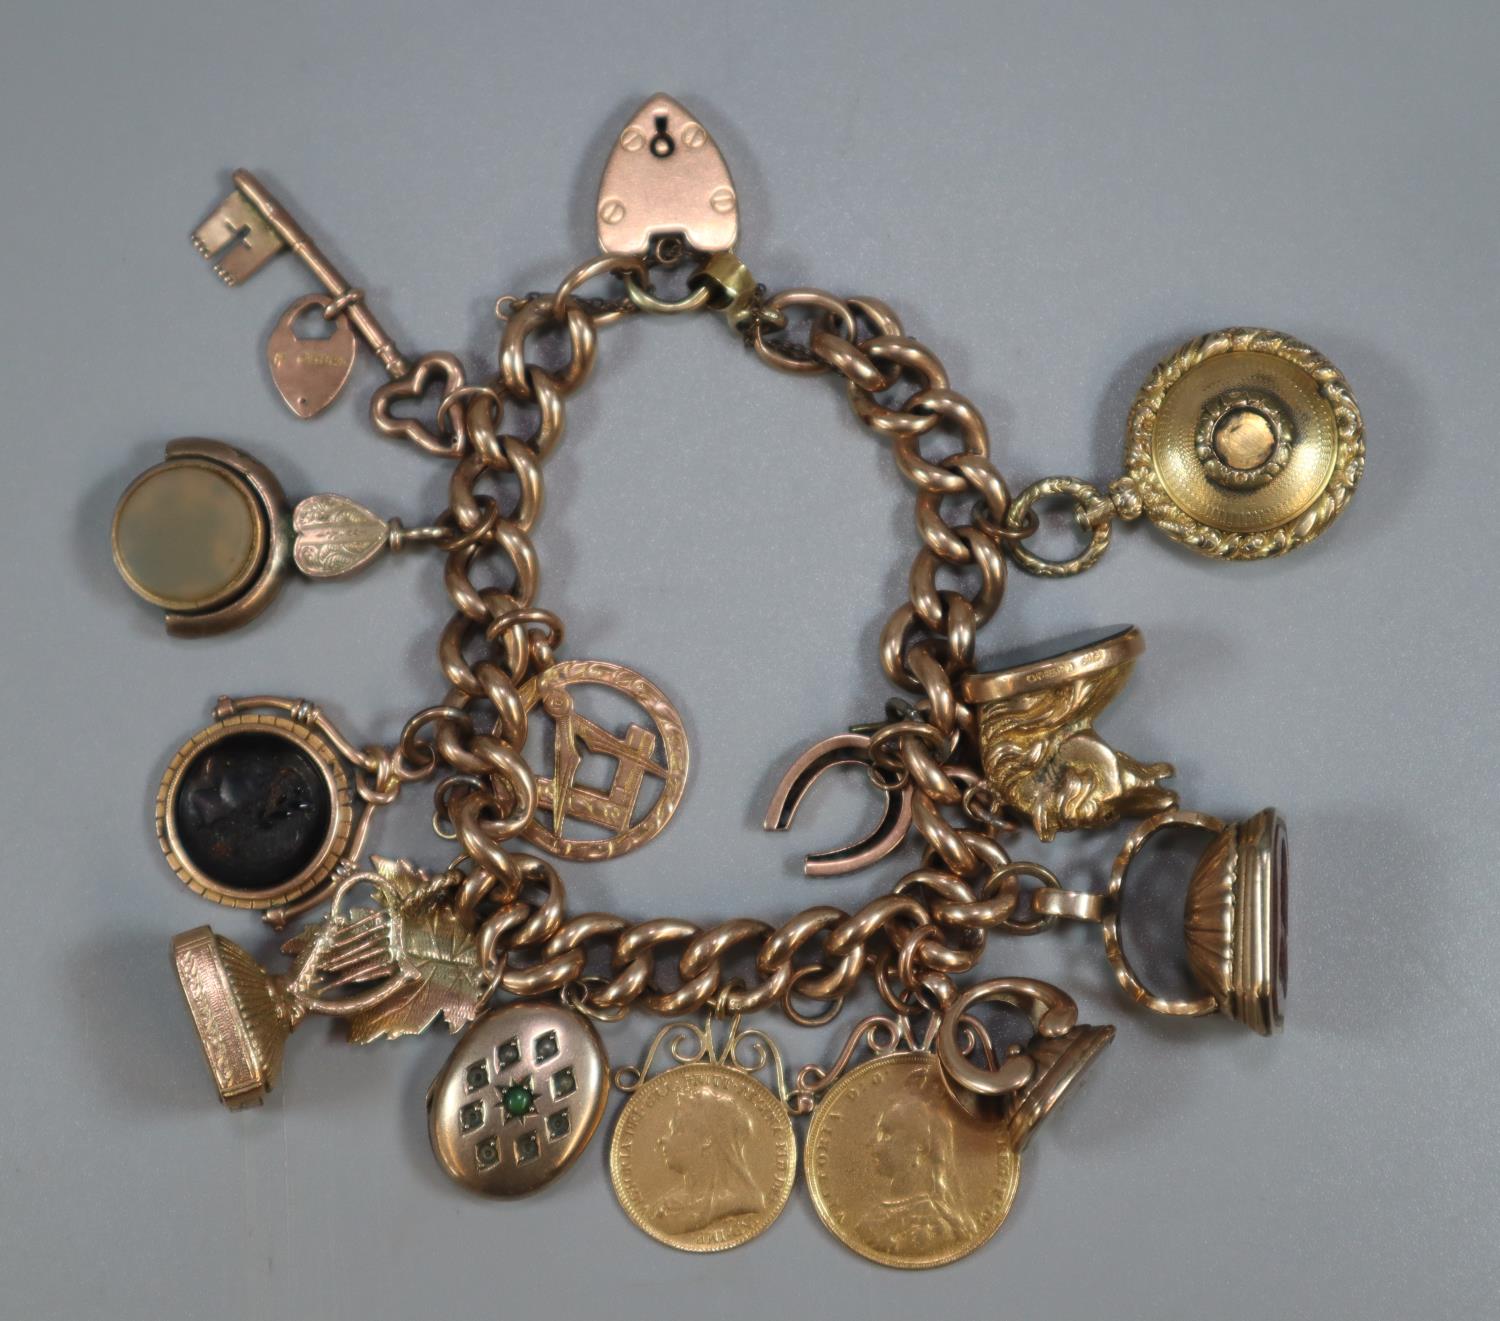 9ct gold curb link charm bracelet with assorted charms including: Masonic, harp, Intaglio seal